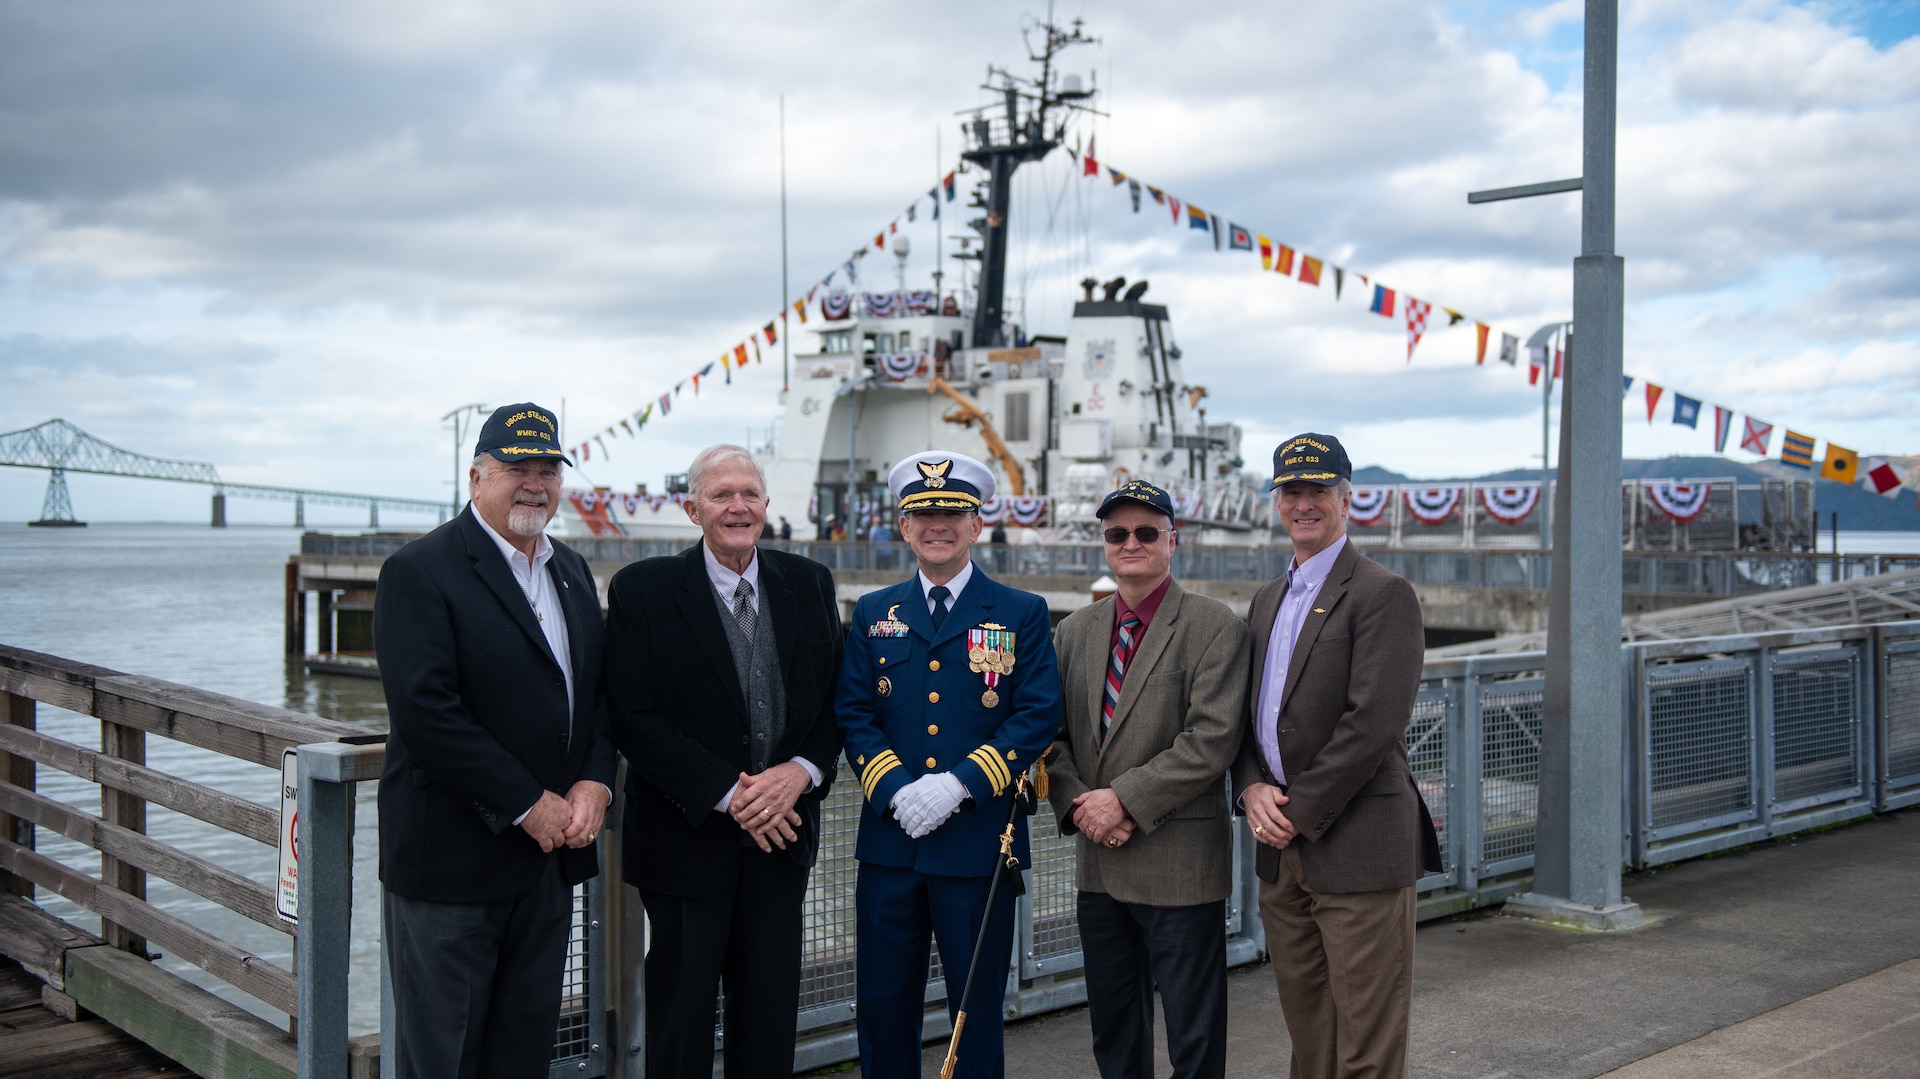 The USCGC Steadfast’s (WMEC 623) prior commanding officers stand before the decommissioned cutter in Astoria, Ore., February 2, 2024. From left to right in the photo is Robert Wicklund, Charles Murray, Cmdr. Brock Eckel, Dr. R.B. Watts and Matt Gimple. (U.S. Coast Guard photo by Petty Officer 3rd class William Kirk)